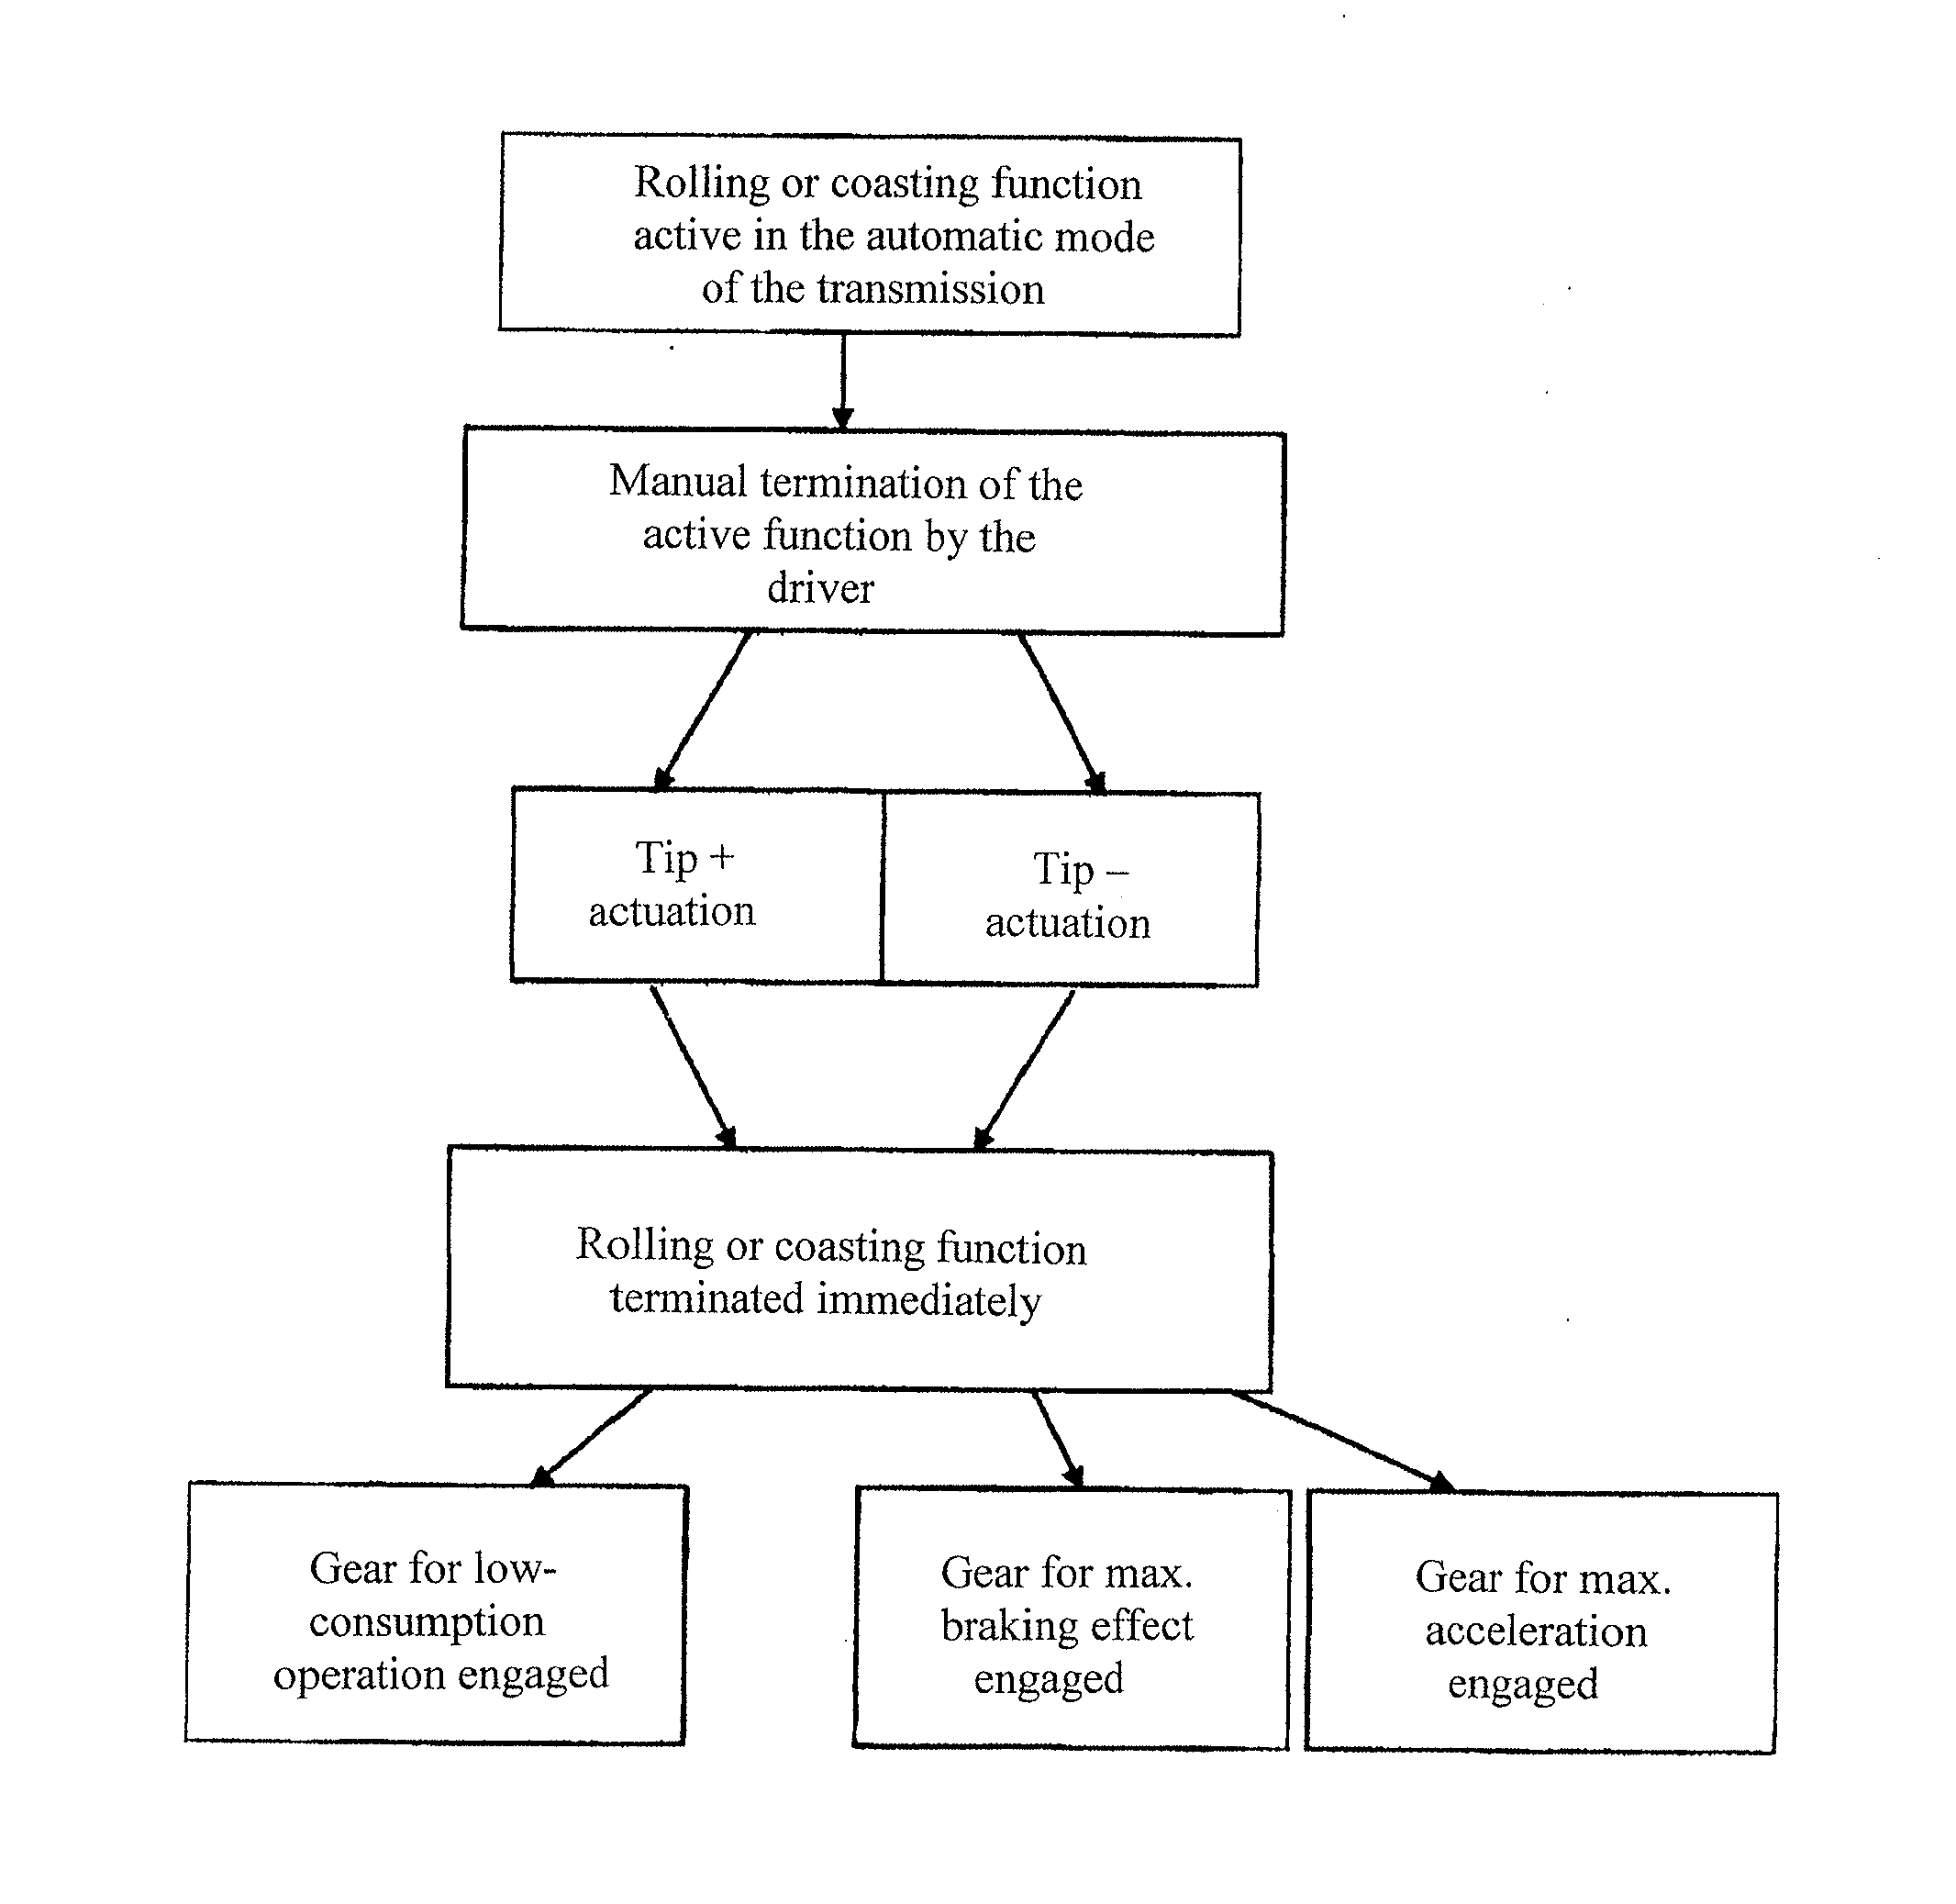 Method for controlling and/or regulating an automated transmission